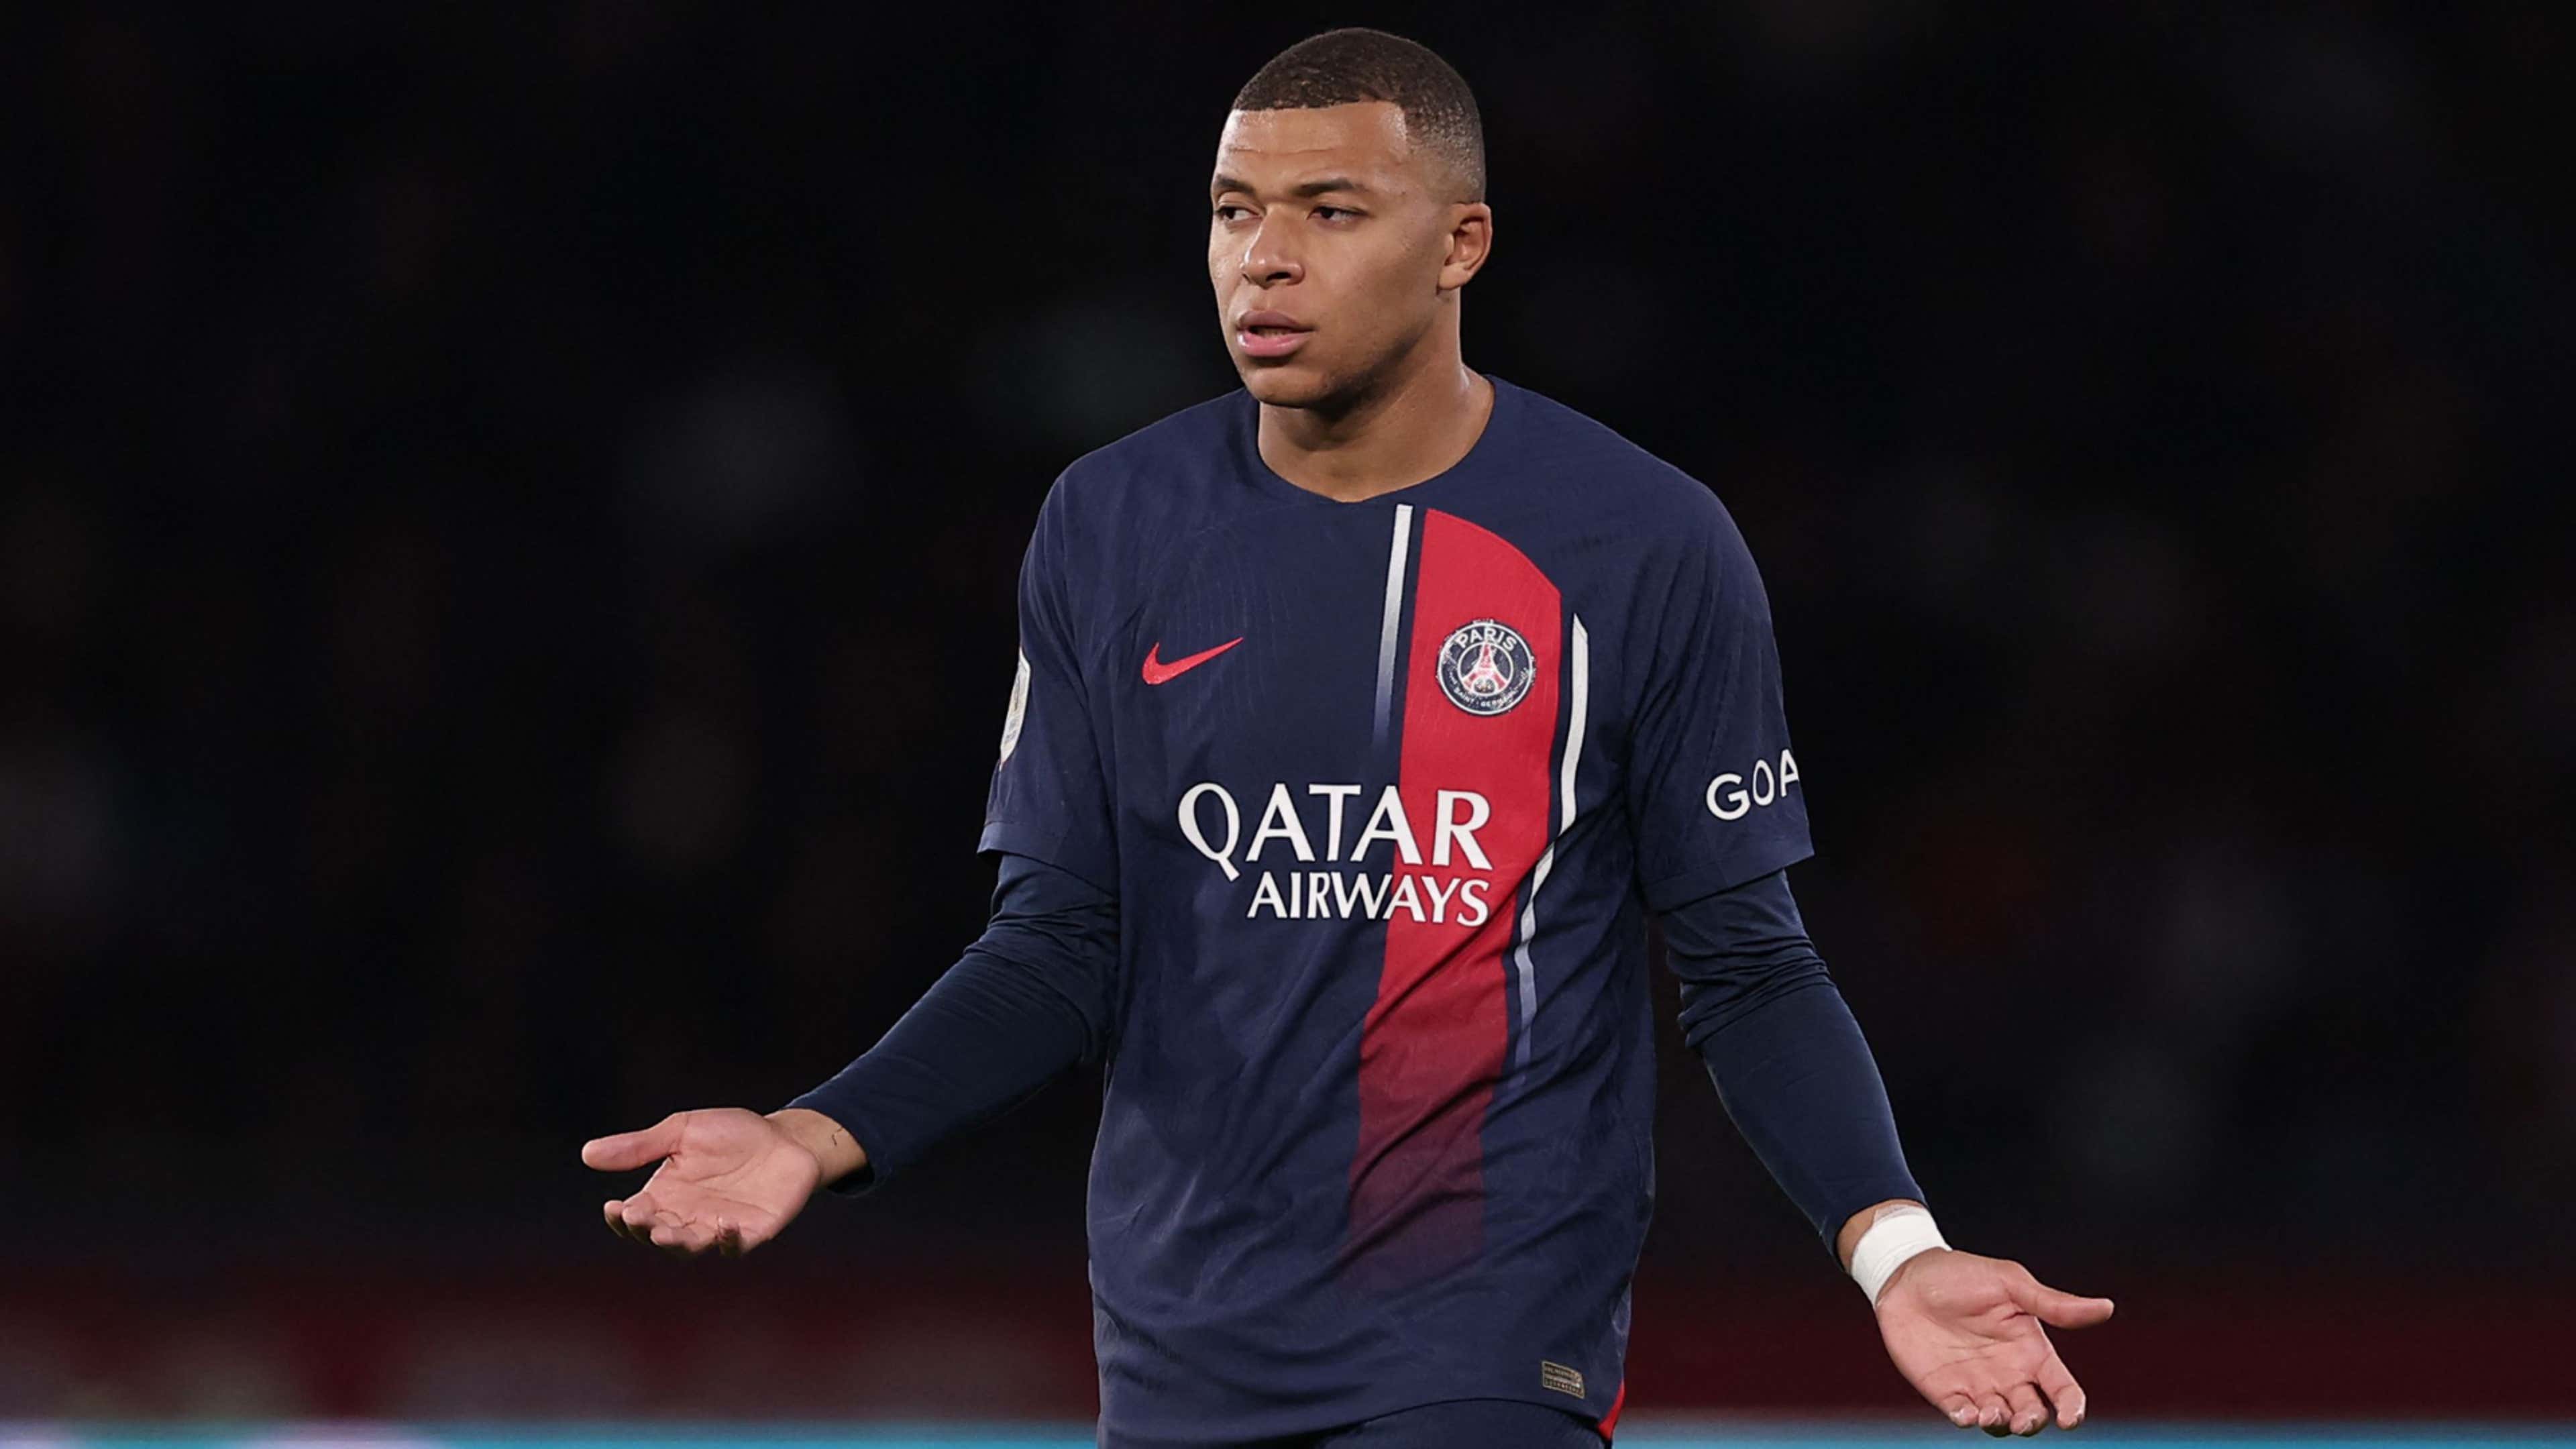 Kylian Mbappe to follow Lionel Messi & Cristiano Ronaldo? PSG superstar  makes surprising 'my turn' statement on MLS & Saudi Pro League transfers  amid complicated Real Madrid saga